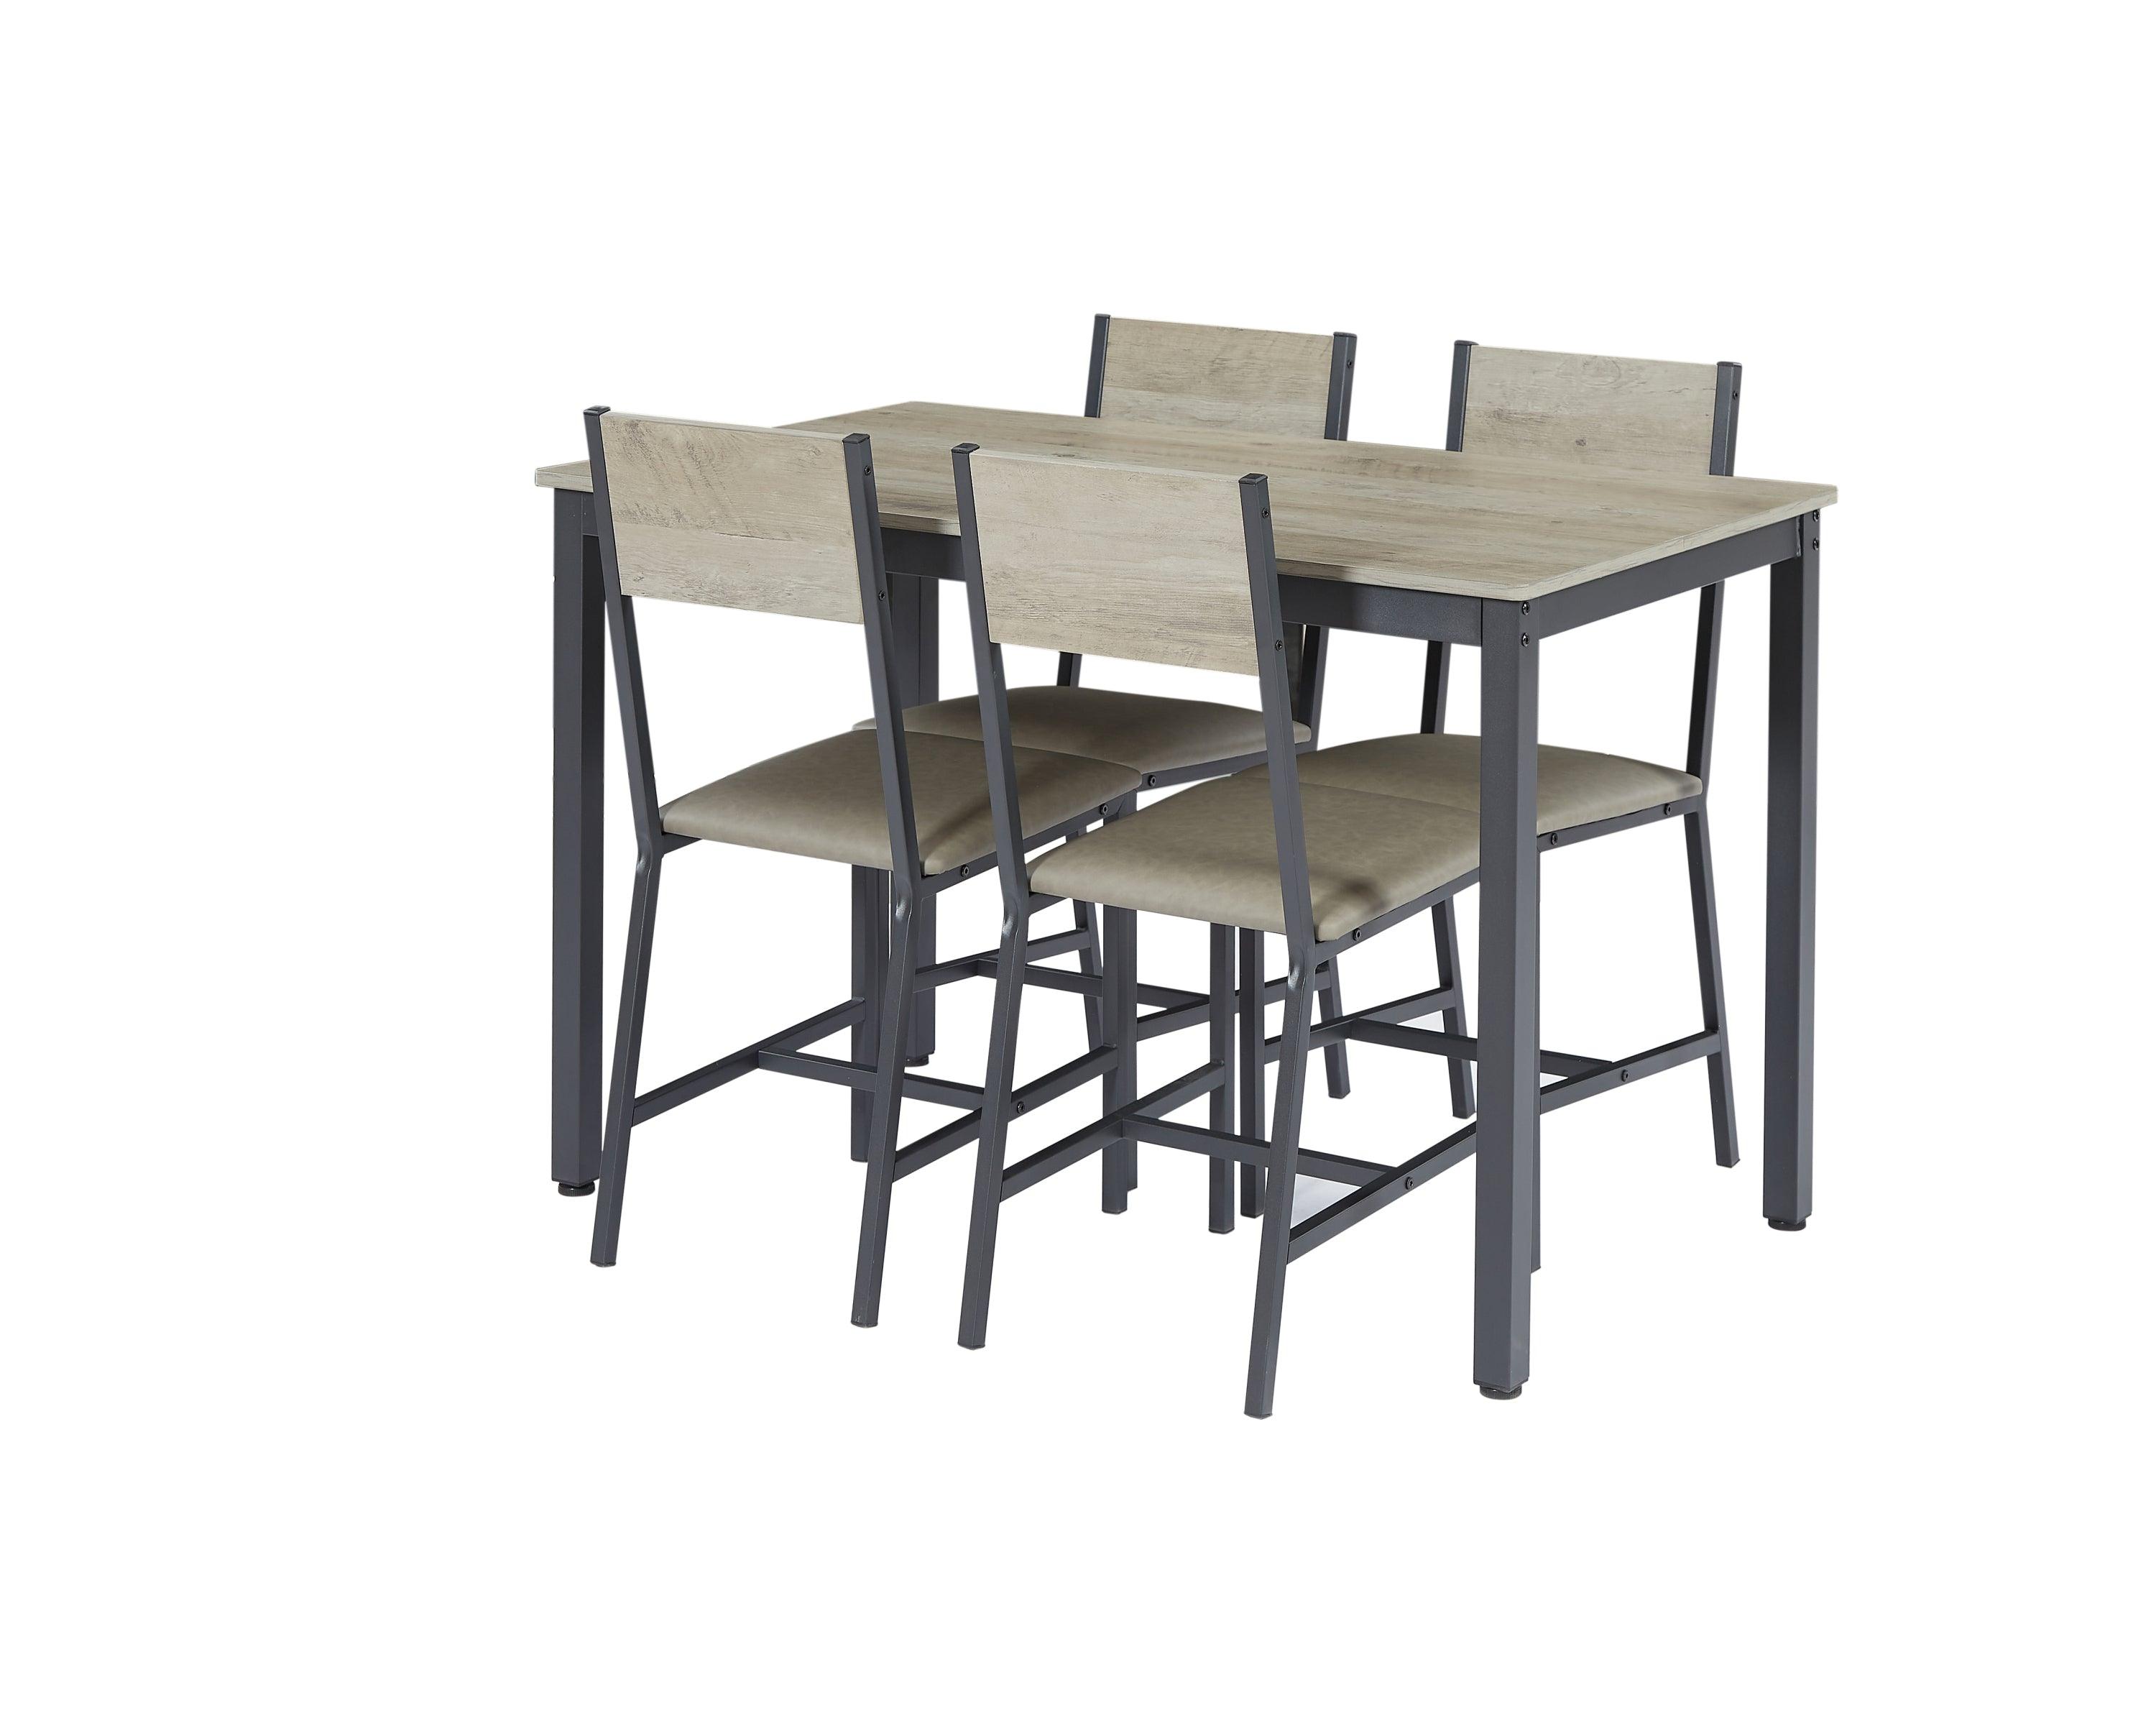 Dining Set For 5 Kitchen Table With 4 Upholstered Chairs, Grey, 47.2'' L X 27.6'' W X 29.7'' H.